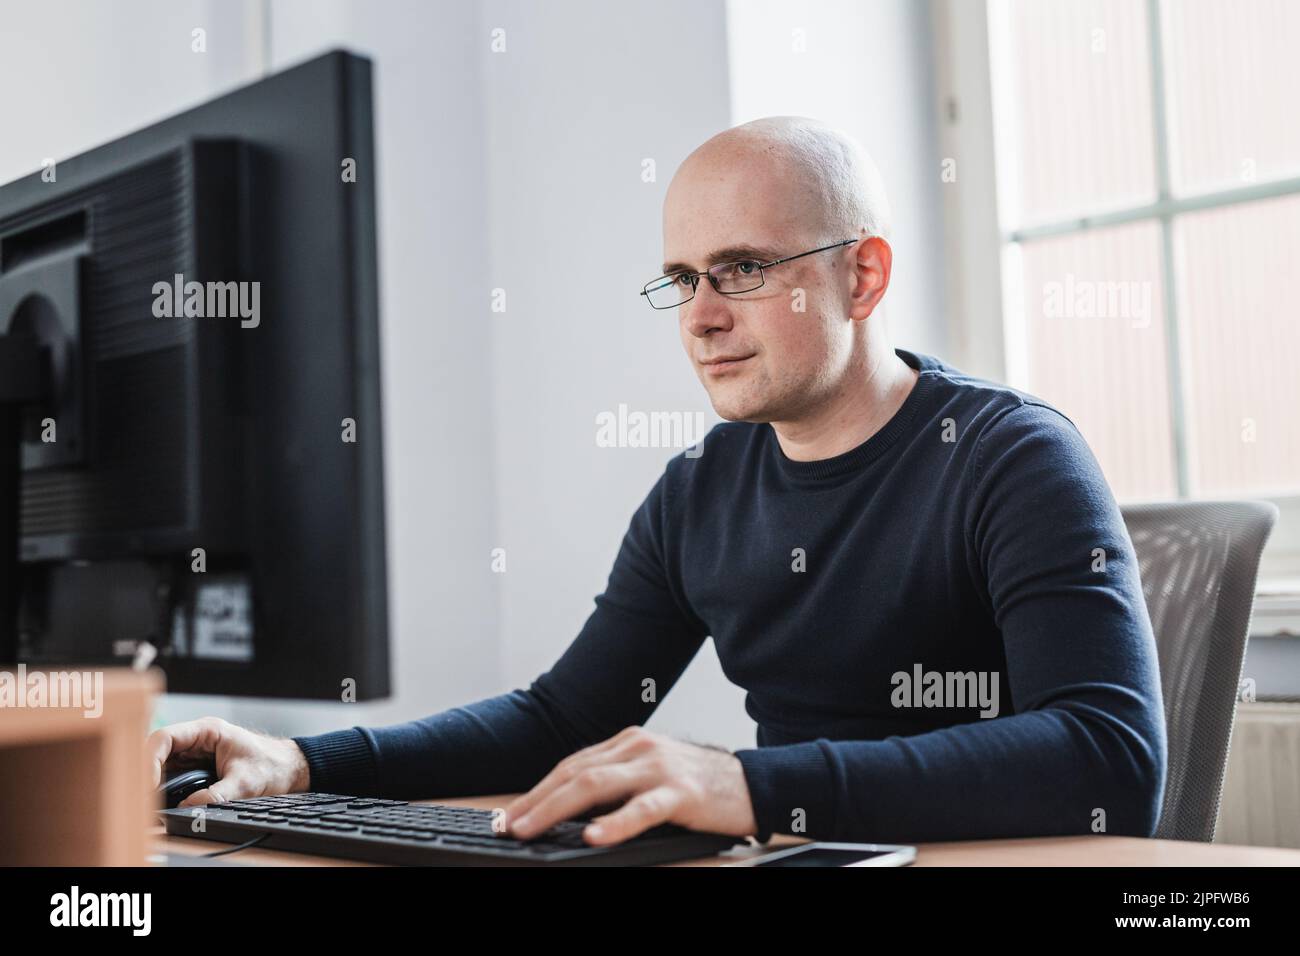 Young Entrepreneur Wearing Eyeglasses Sitting at his Table Inside the Office, Looking at the Report on his Computer Screen. Stock Photo